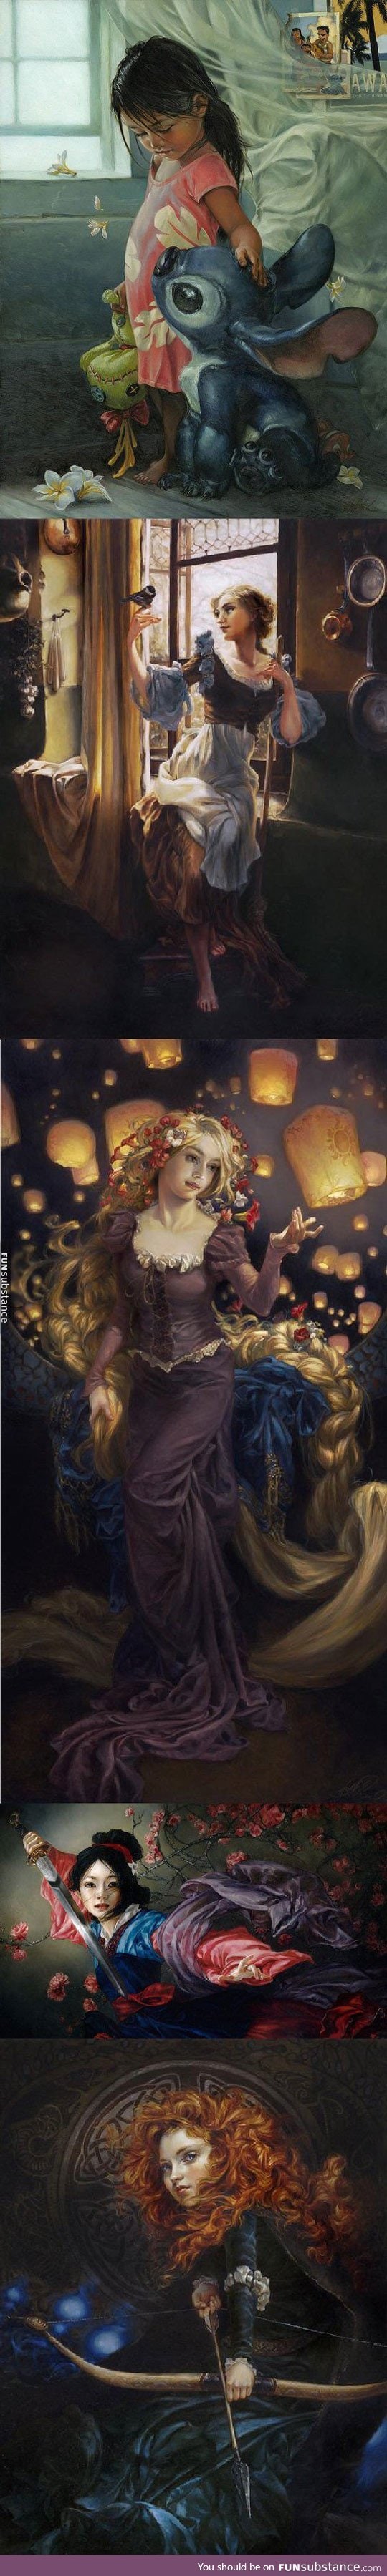 Disney oil painting masterpieces